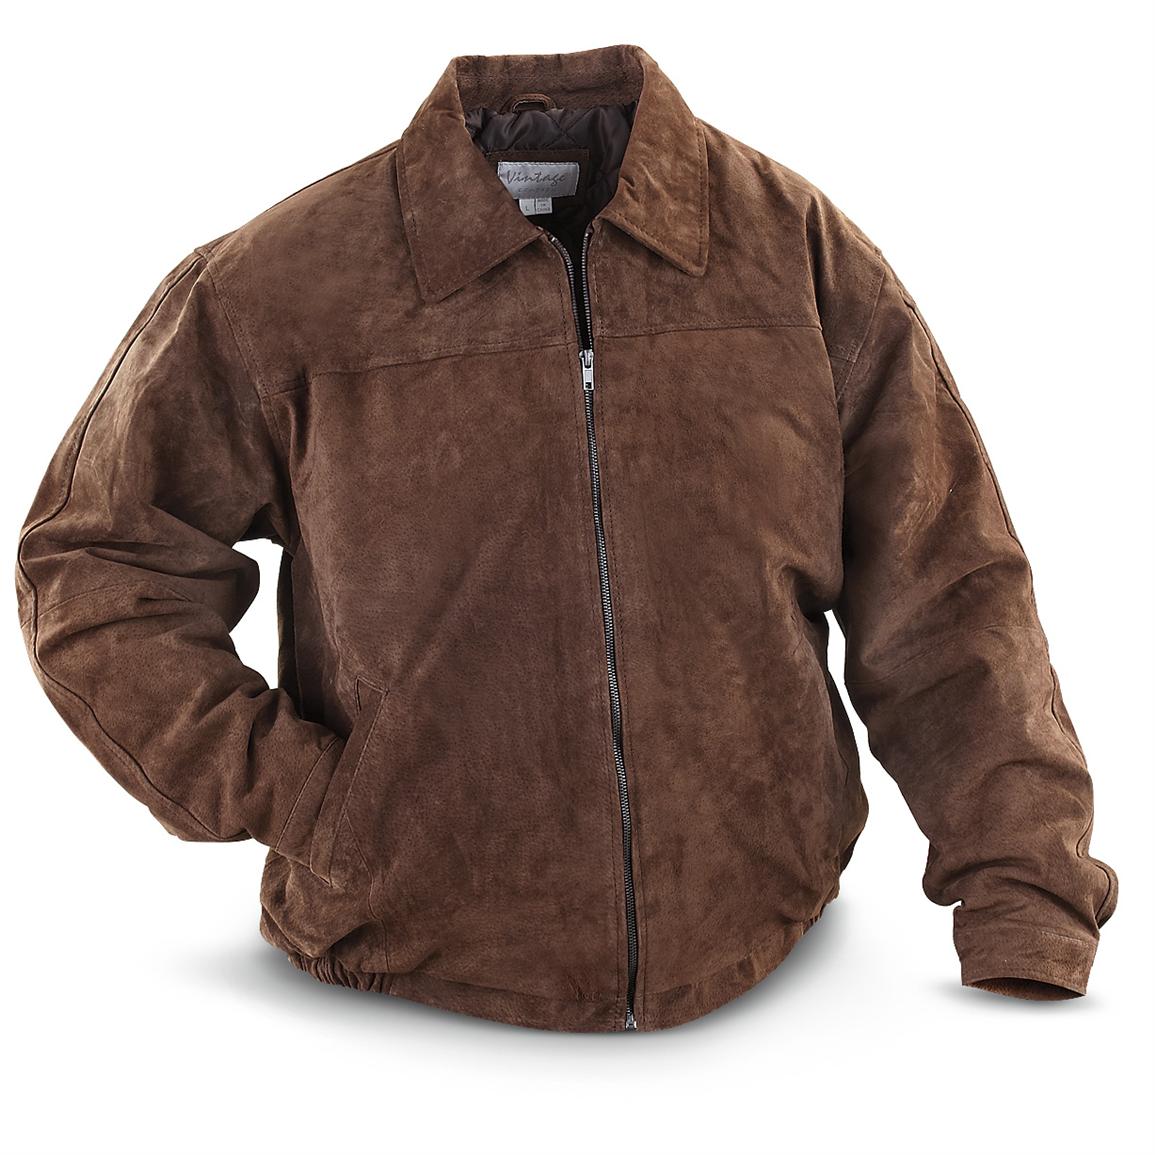 Vintage Suede Bomber Jacket - 203614, Insulated Jackets & Coats at ...